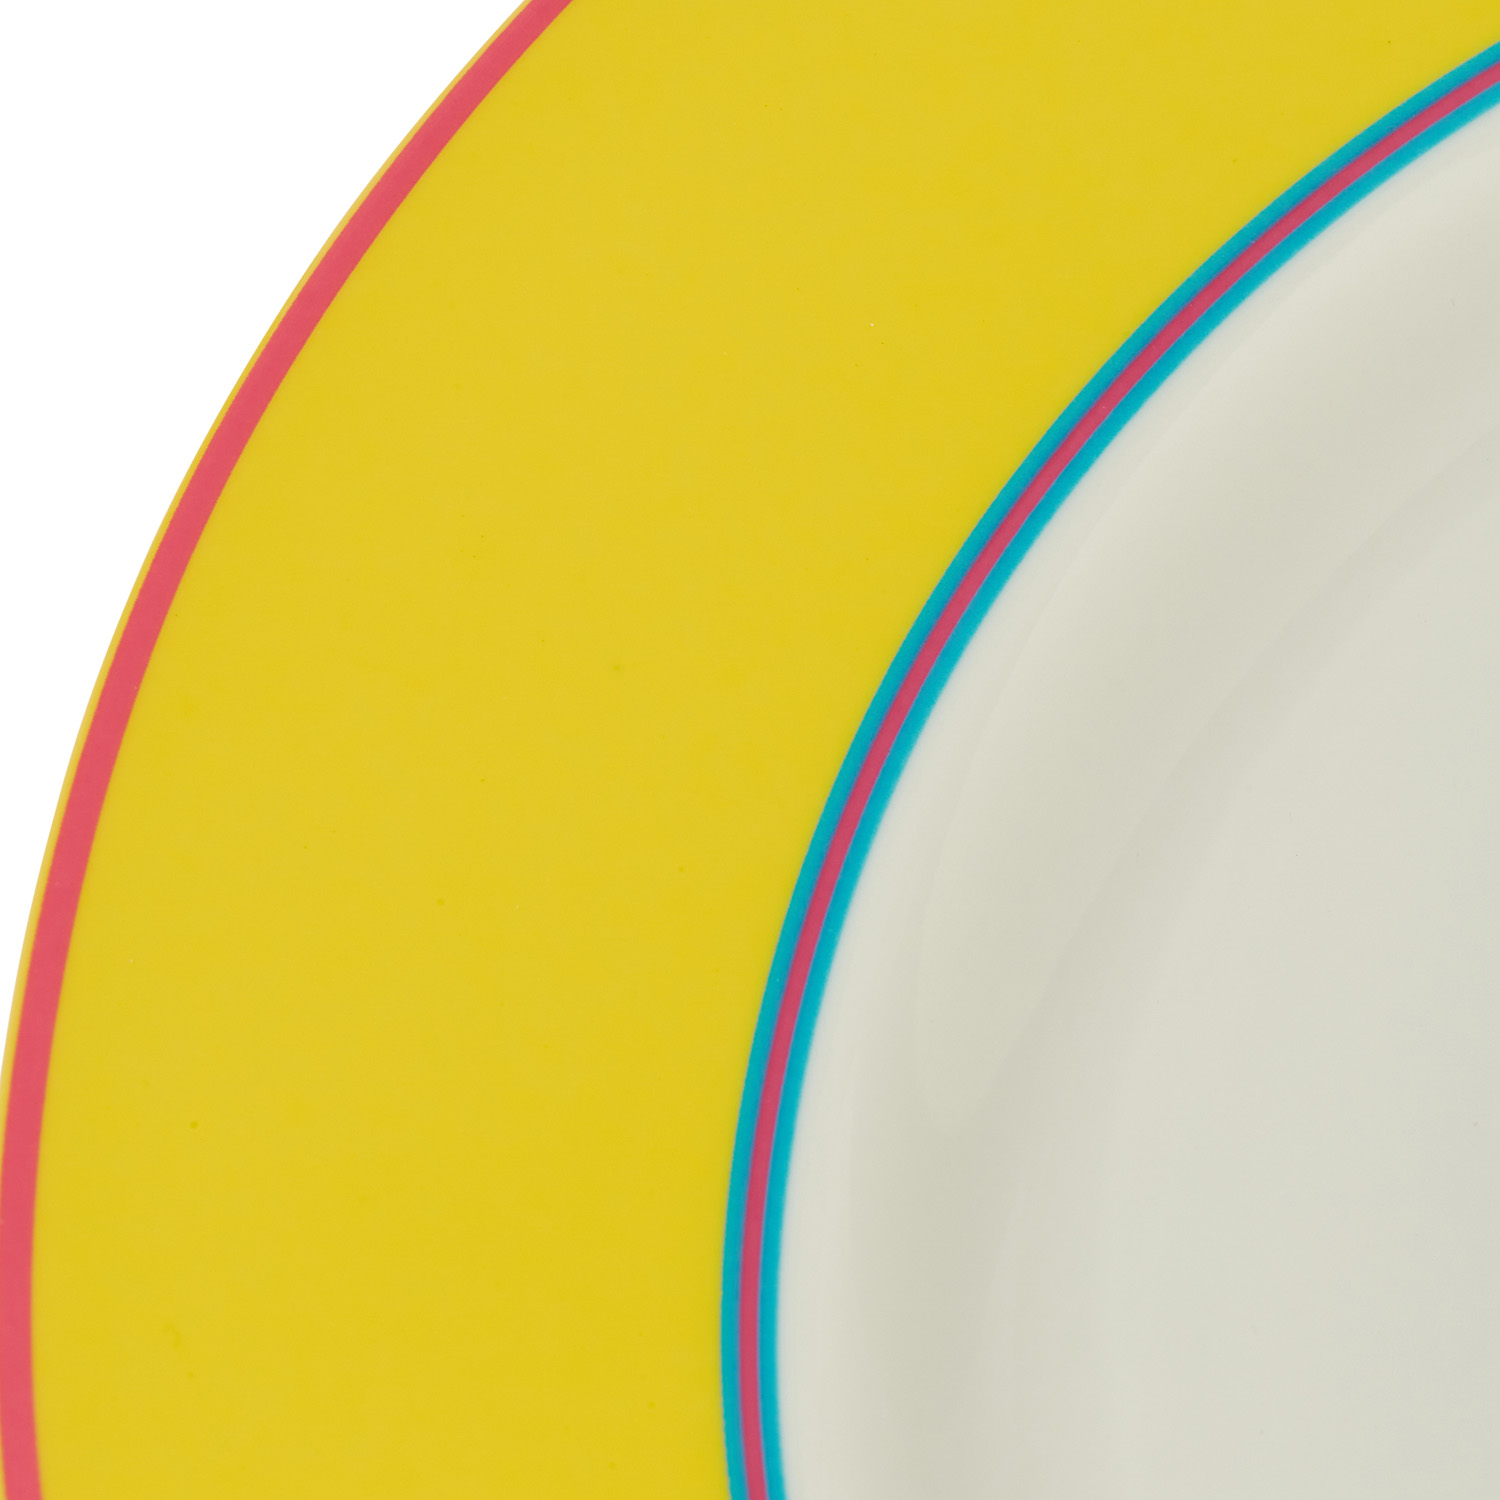 Kit Kemp Calypso Yellow Dinner Plate image number null